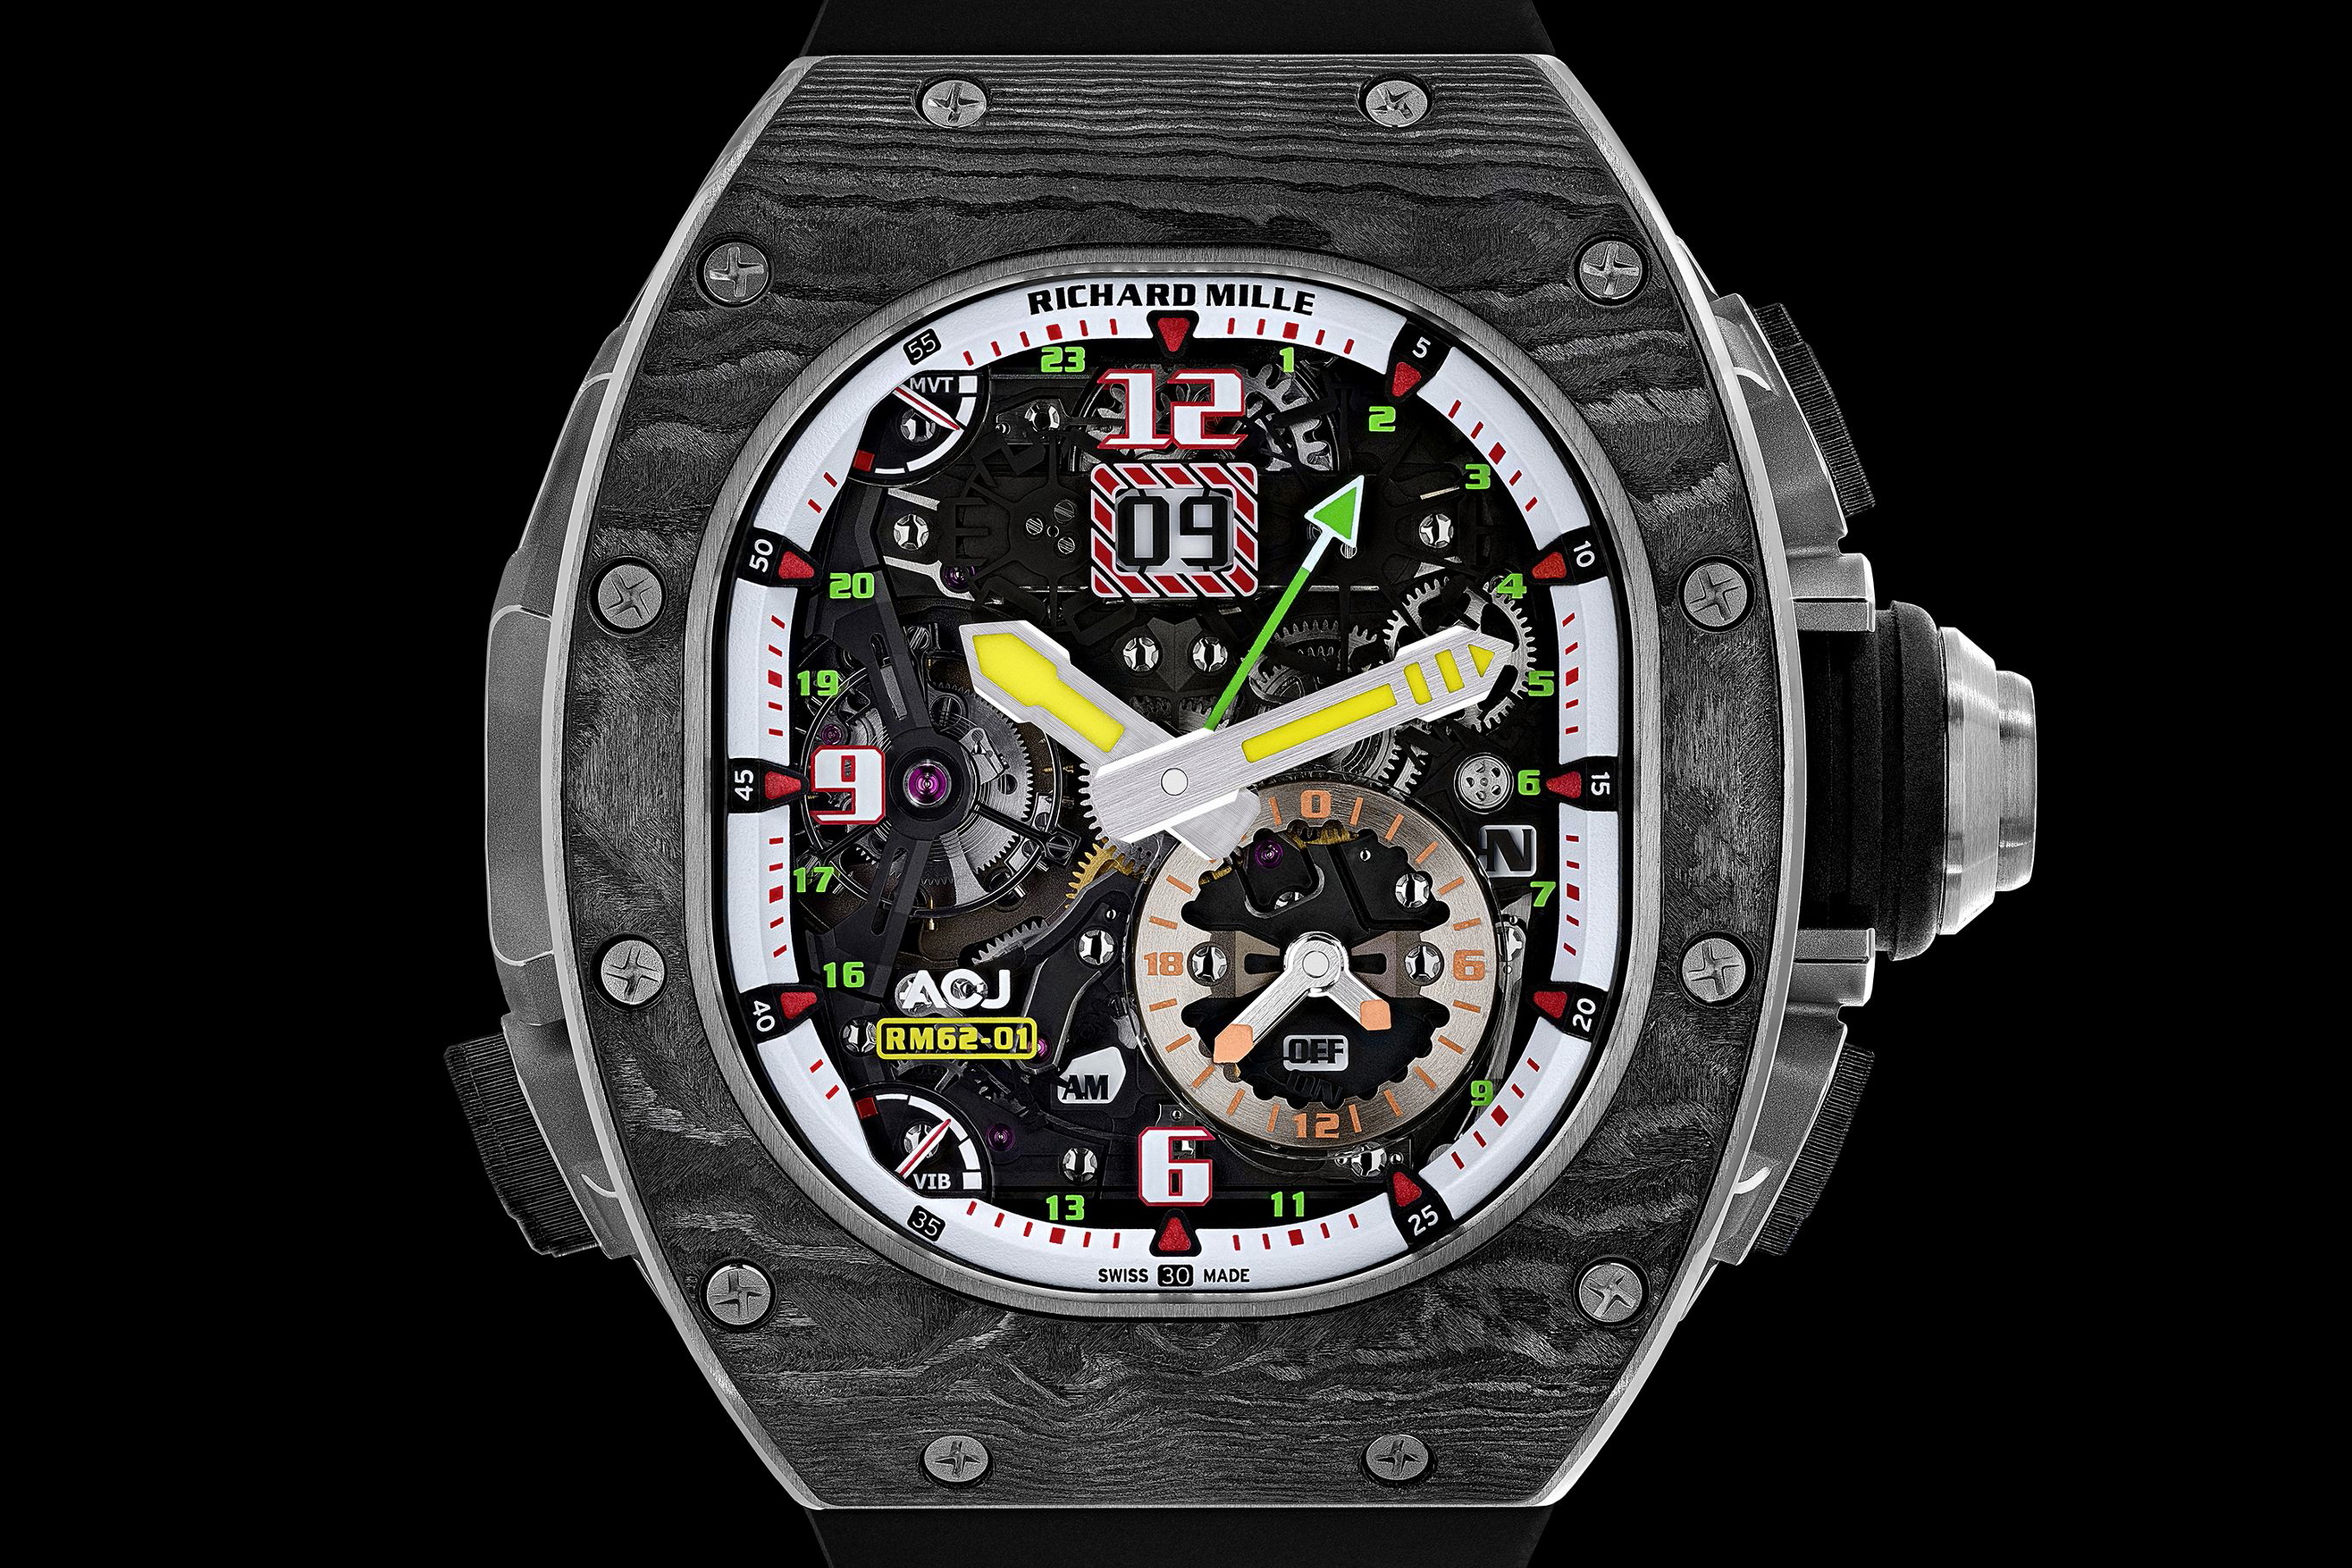 Airbus Corporate Jets (ACJ) and Richard Mille, the man and company that created Rafael Nadal’s world-famous collection of truly outstanding timepieces, have launched a new watch. Called the RM 62-01 Tourbillon Vibrating Alarm ACJ, the watch features a discreet alarm that alerts the wearer through vibrations that only they can feel. Click to enlarge.